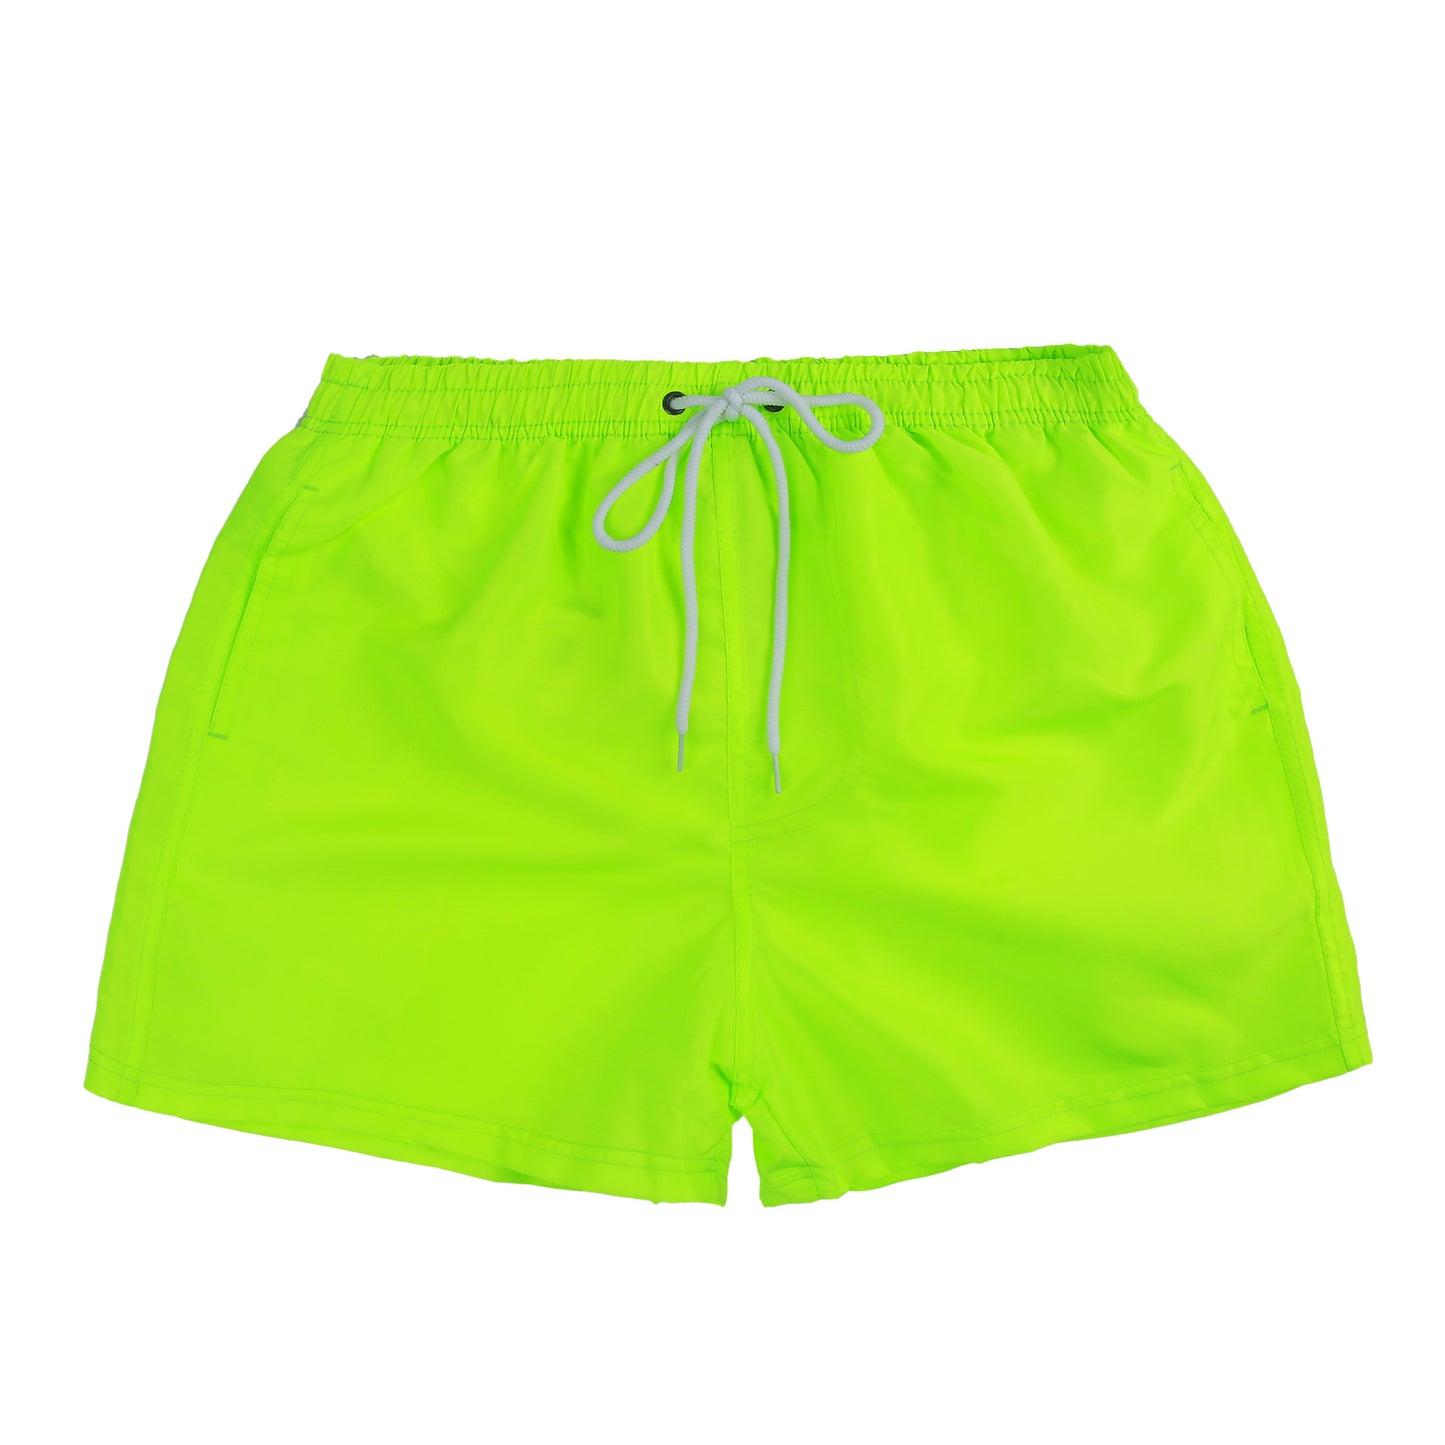 Men's Beach Shorts Quick-drying Casual Surf Pants Loose Sports Shorts For Men Summer